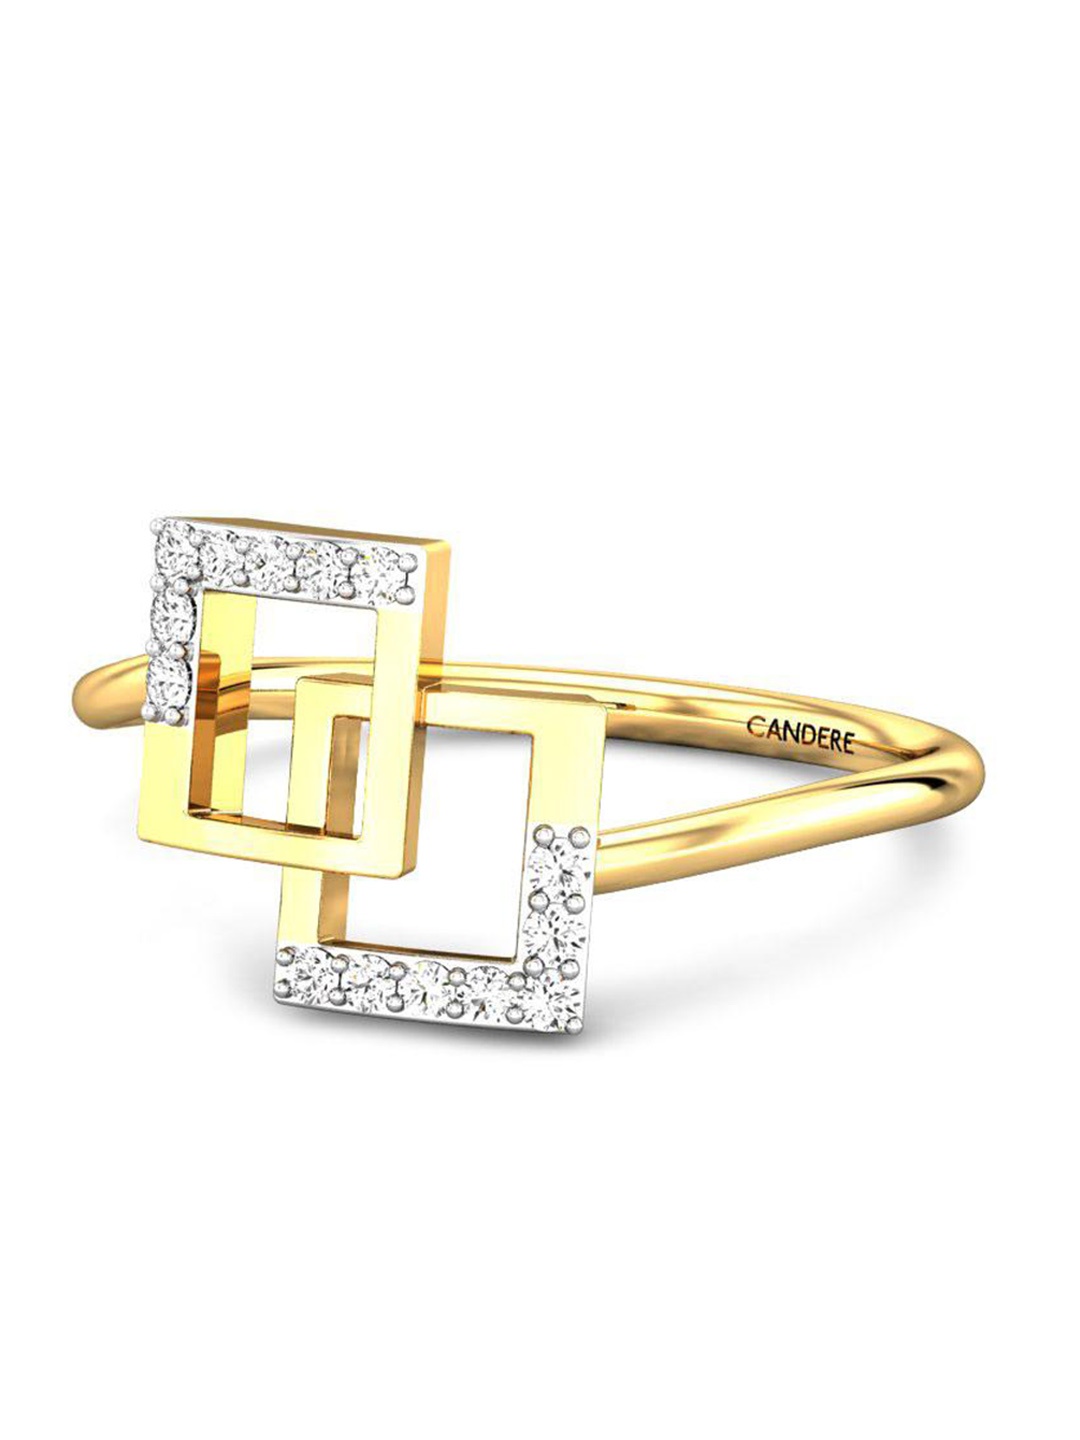 

CANDERE A KALYAN JEWELLERS COMPANY Cubic Zirconia-Studded 14KT Gold Finger Ring-1.4 g